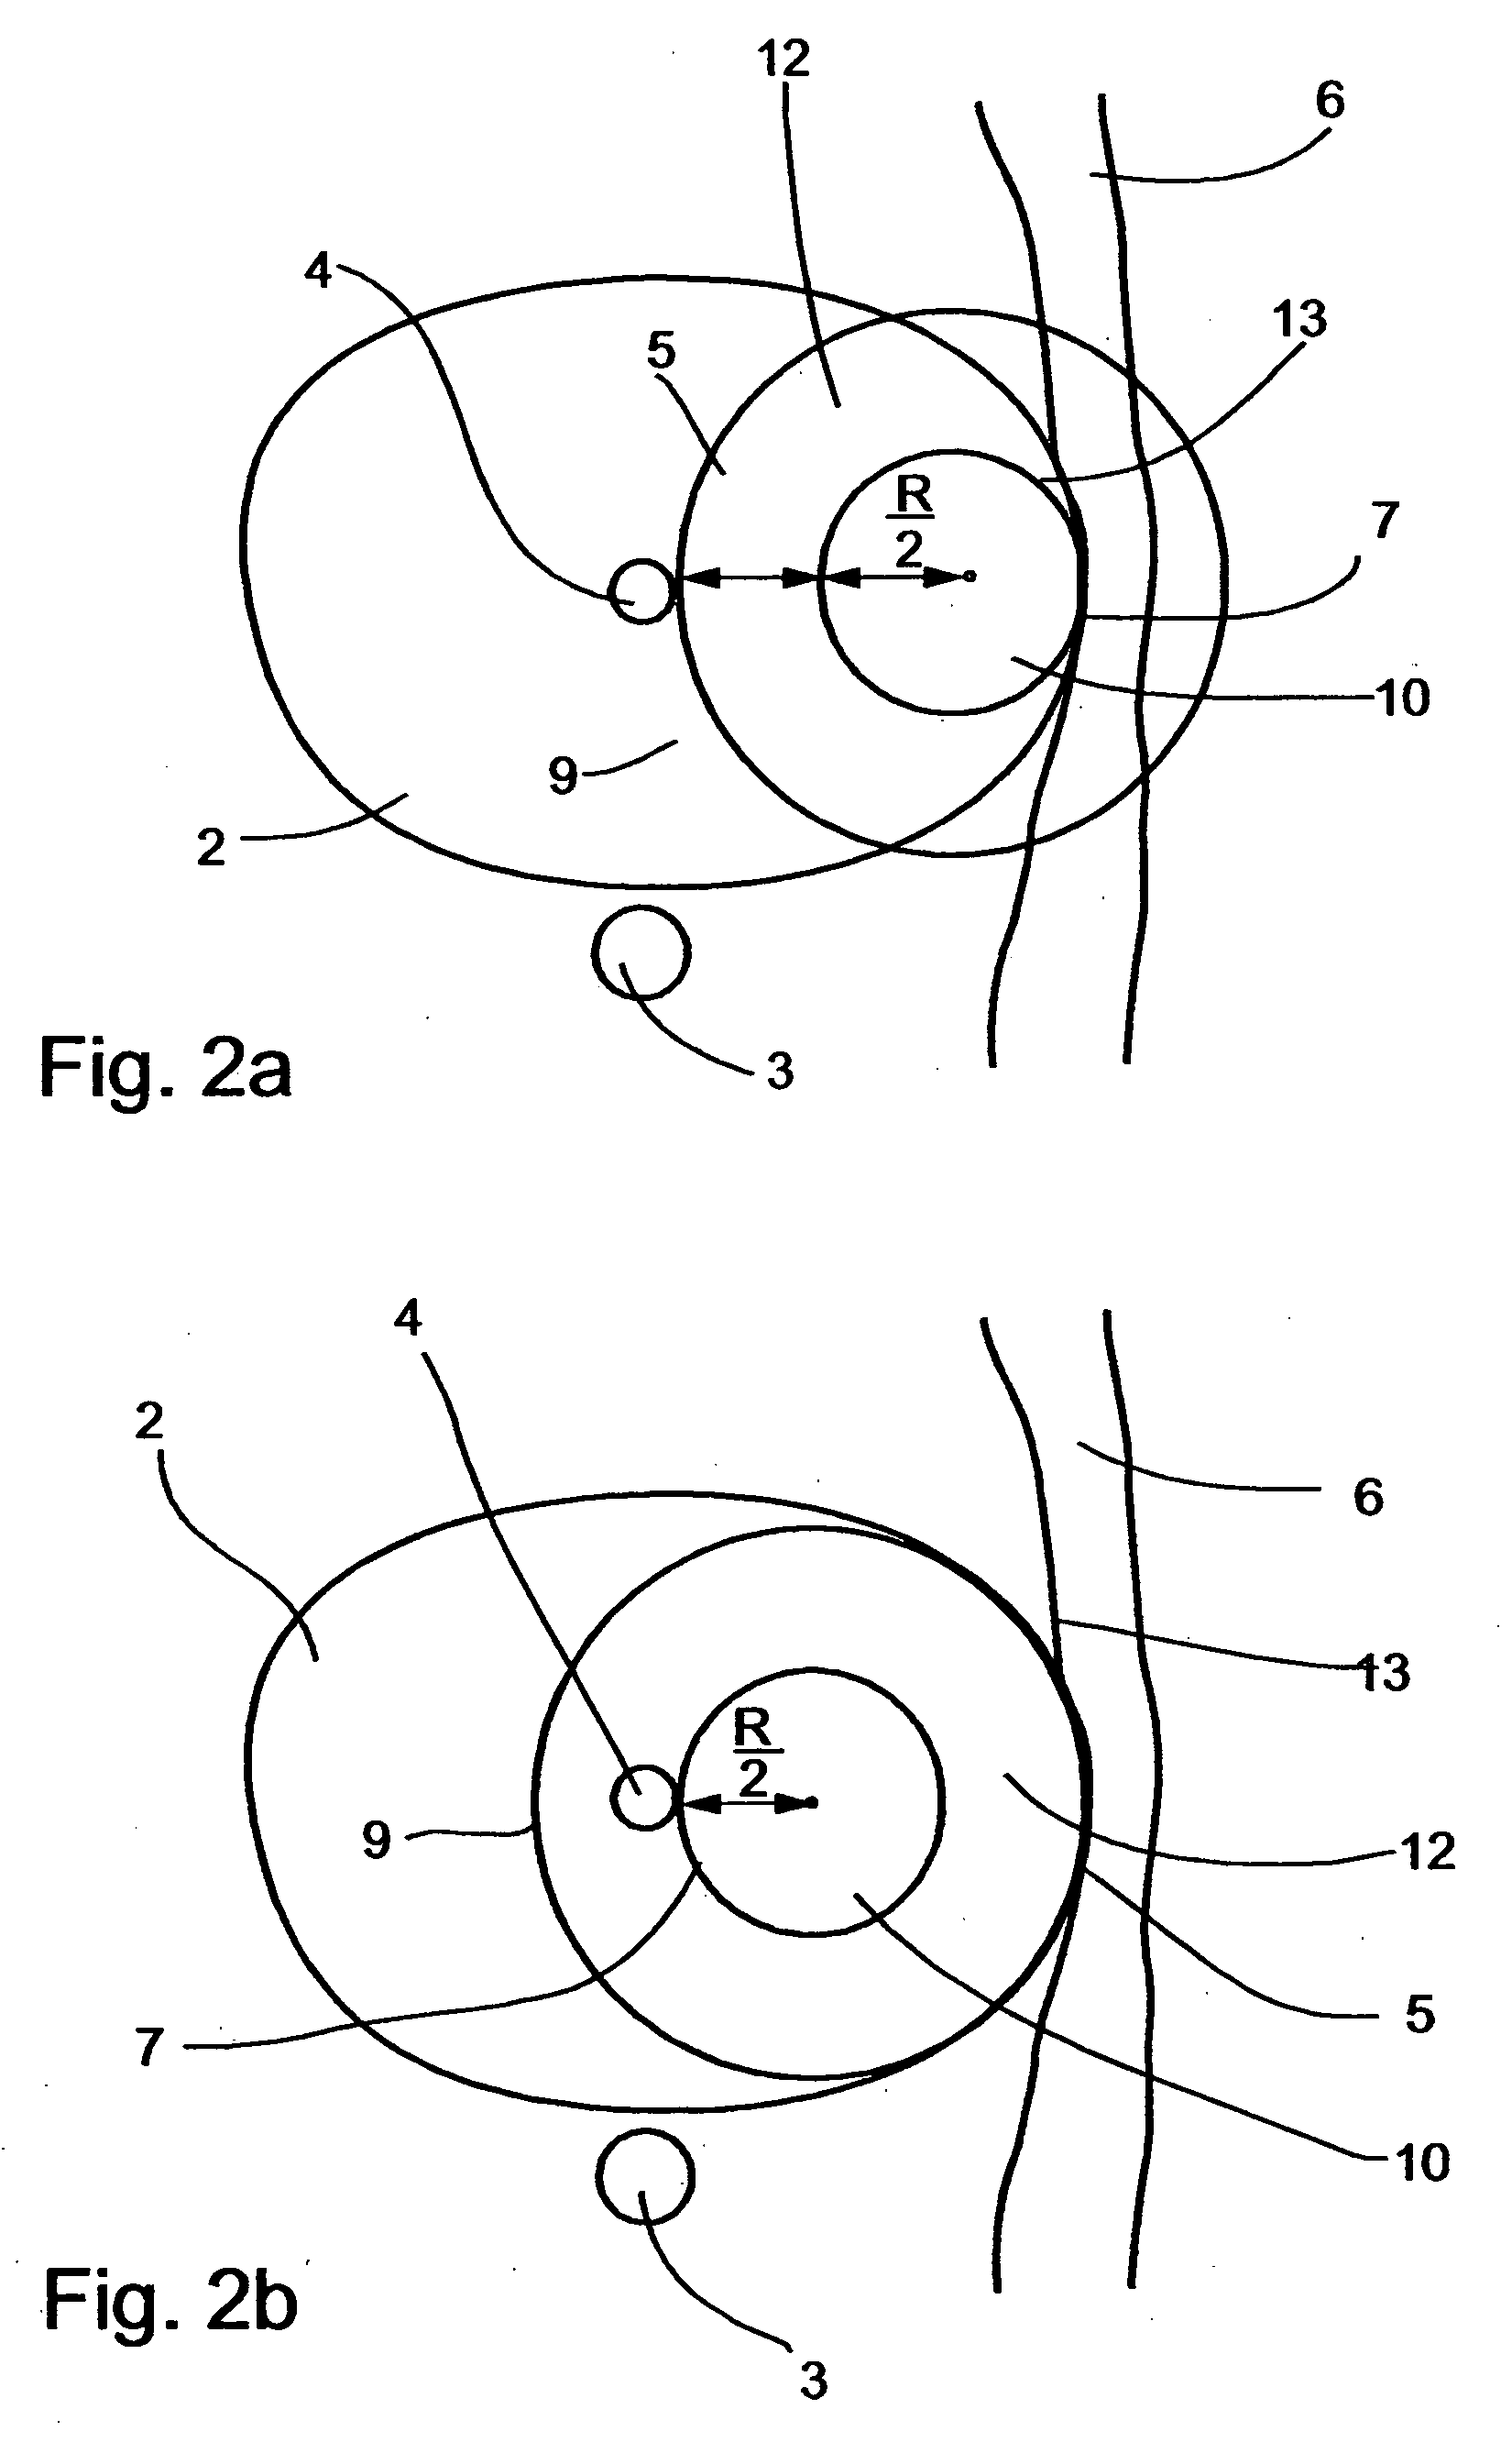 Method for delimiting cryoablation by controlled cooling